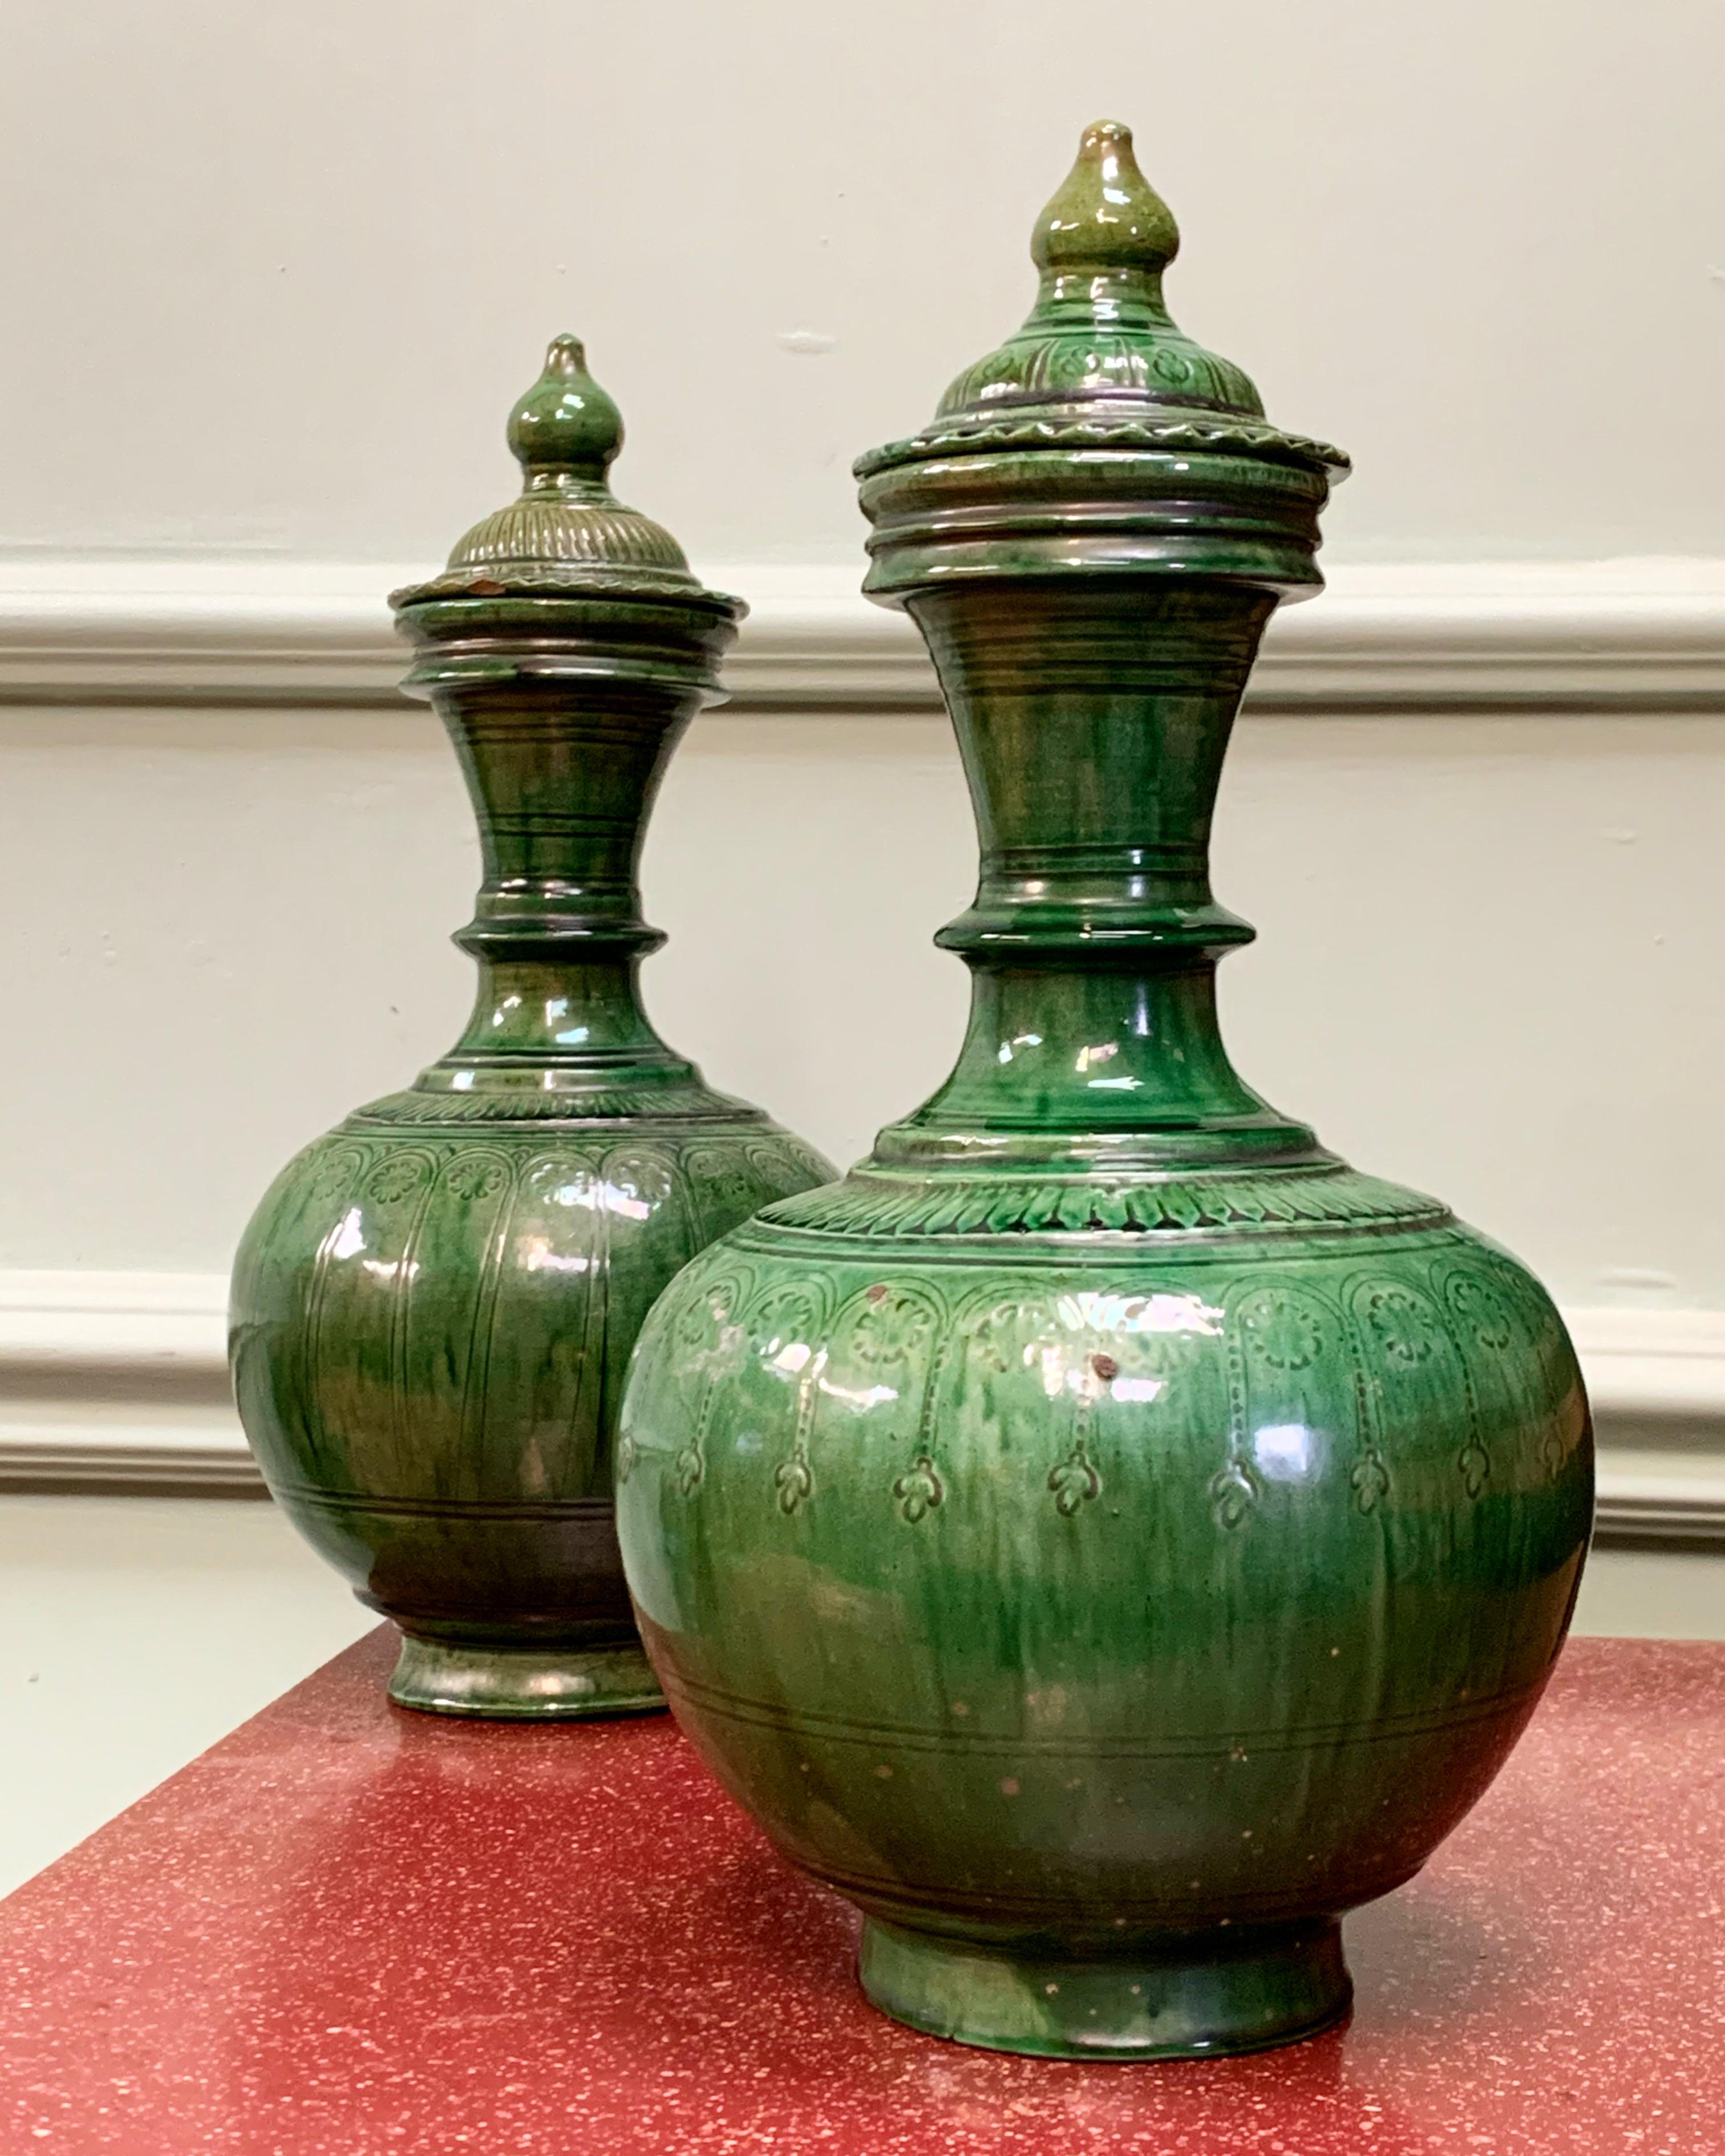 A pair of vases with rounded body, widening tubular neck and mouth, the body with moulded under the plan green glaze with a band of arched floral motifs around the shoulder and slight iridescence of glaze all over. Derived from the green glazed